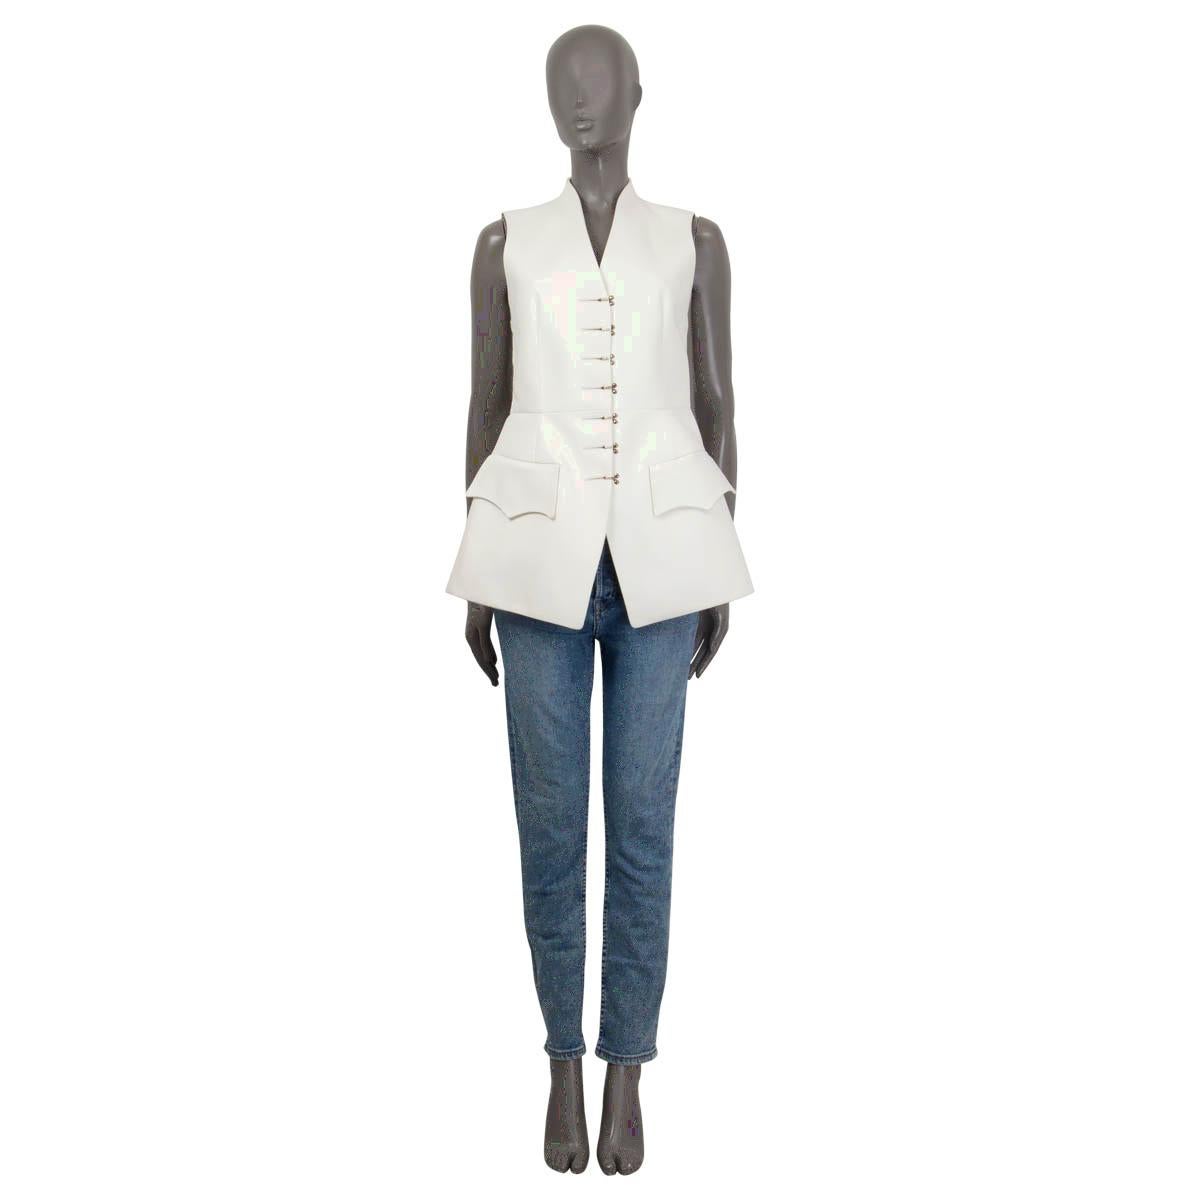 100% authentic Louis Vuitton Spring/Summer 2018 asymmetrical vest in off-white lamb leather and silk (100%). Features two flap pockets on the front. Opens with seven metal hooks at the front. Lined in off-white silk (100%). Has been worn and is in